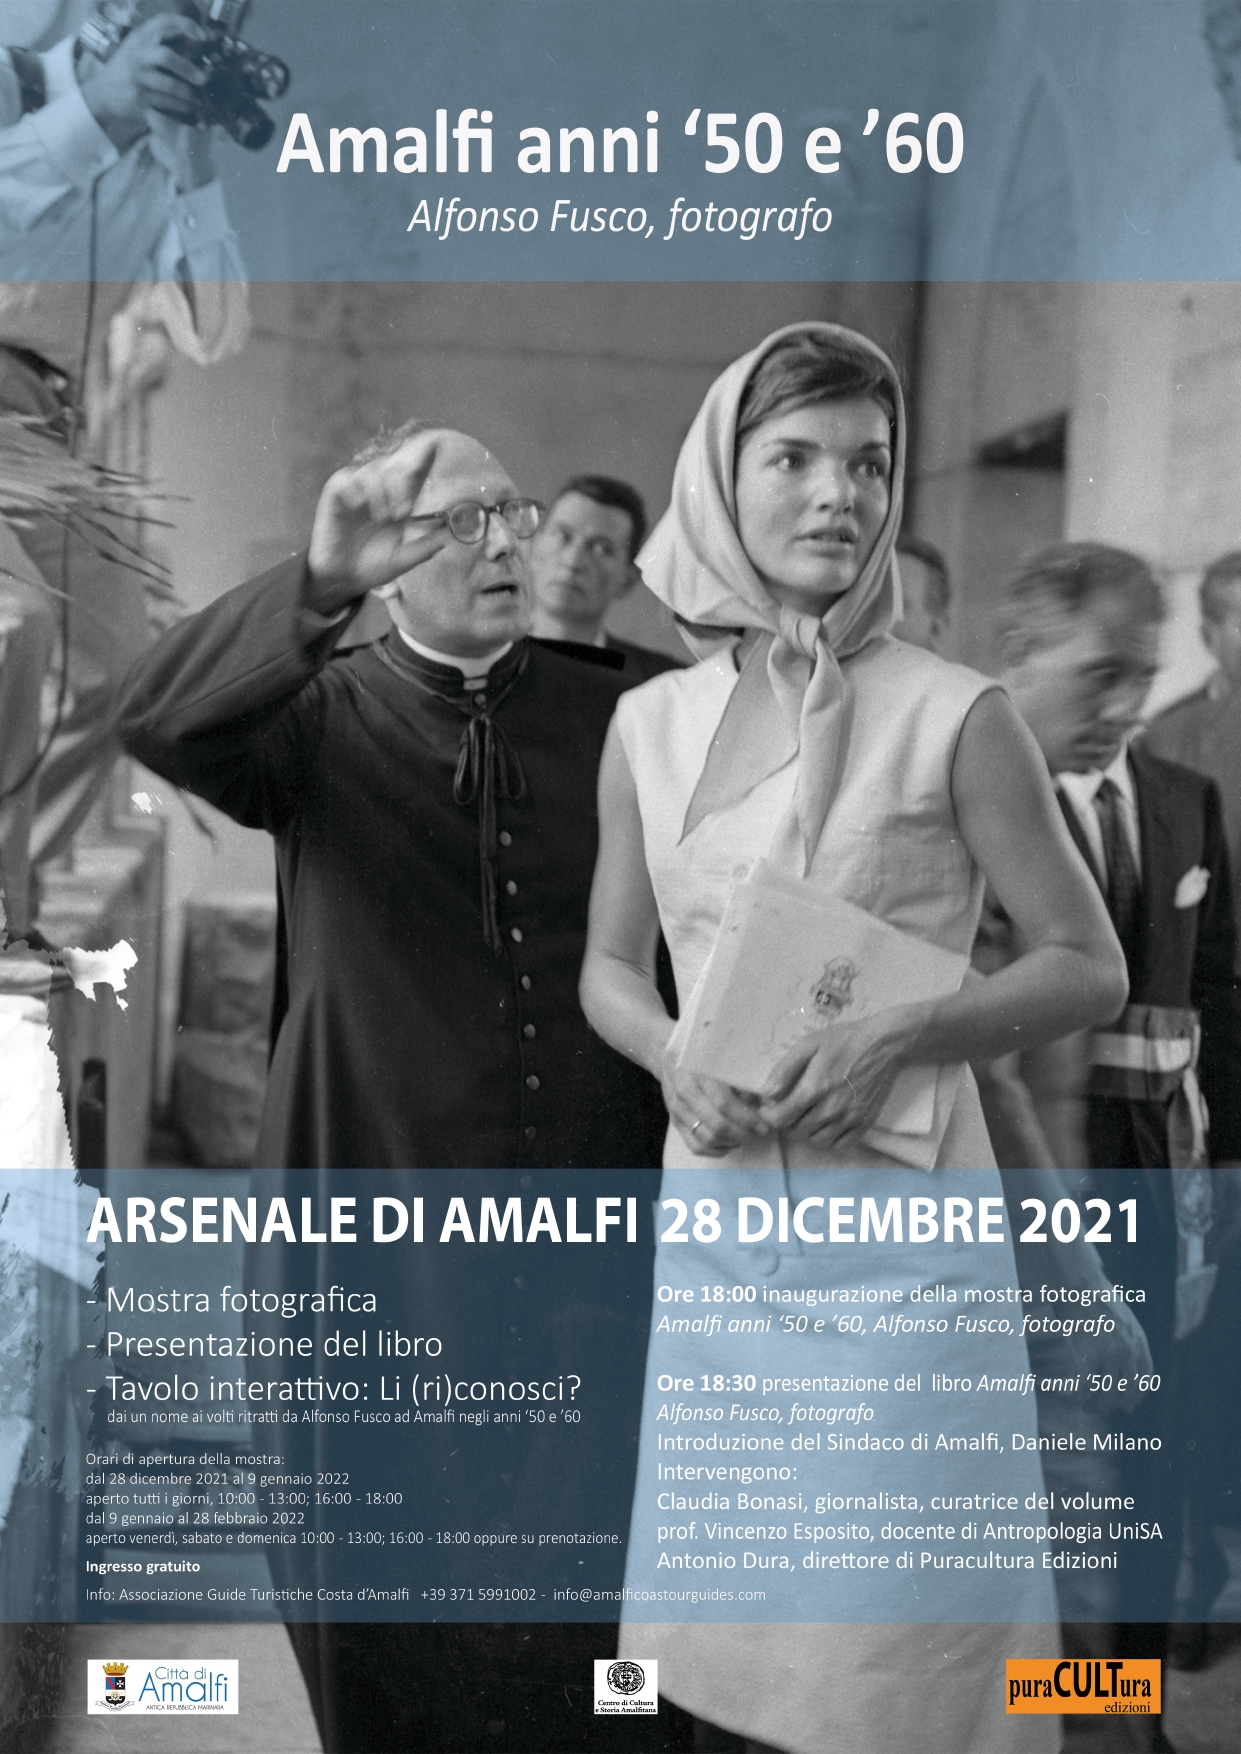 Alfonso Fusco on display, stories of Amalfi in the 1950s and 1960s